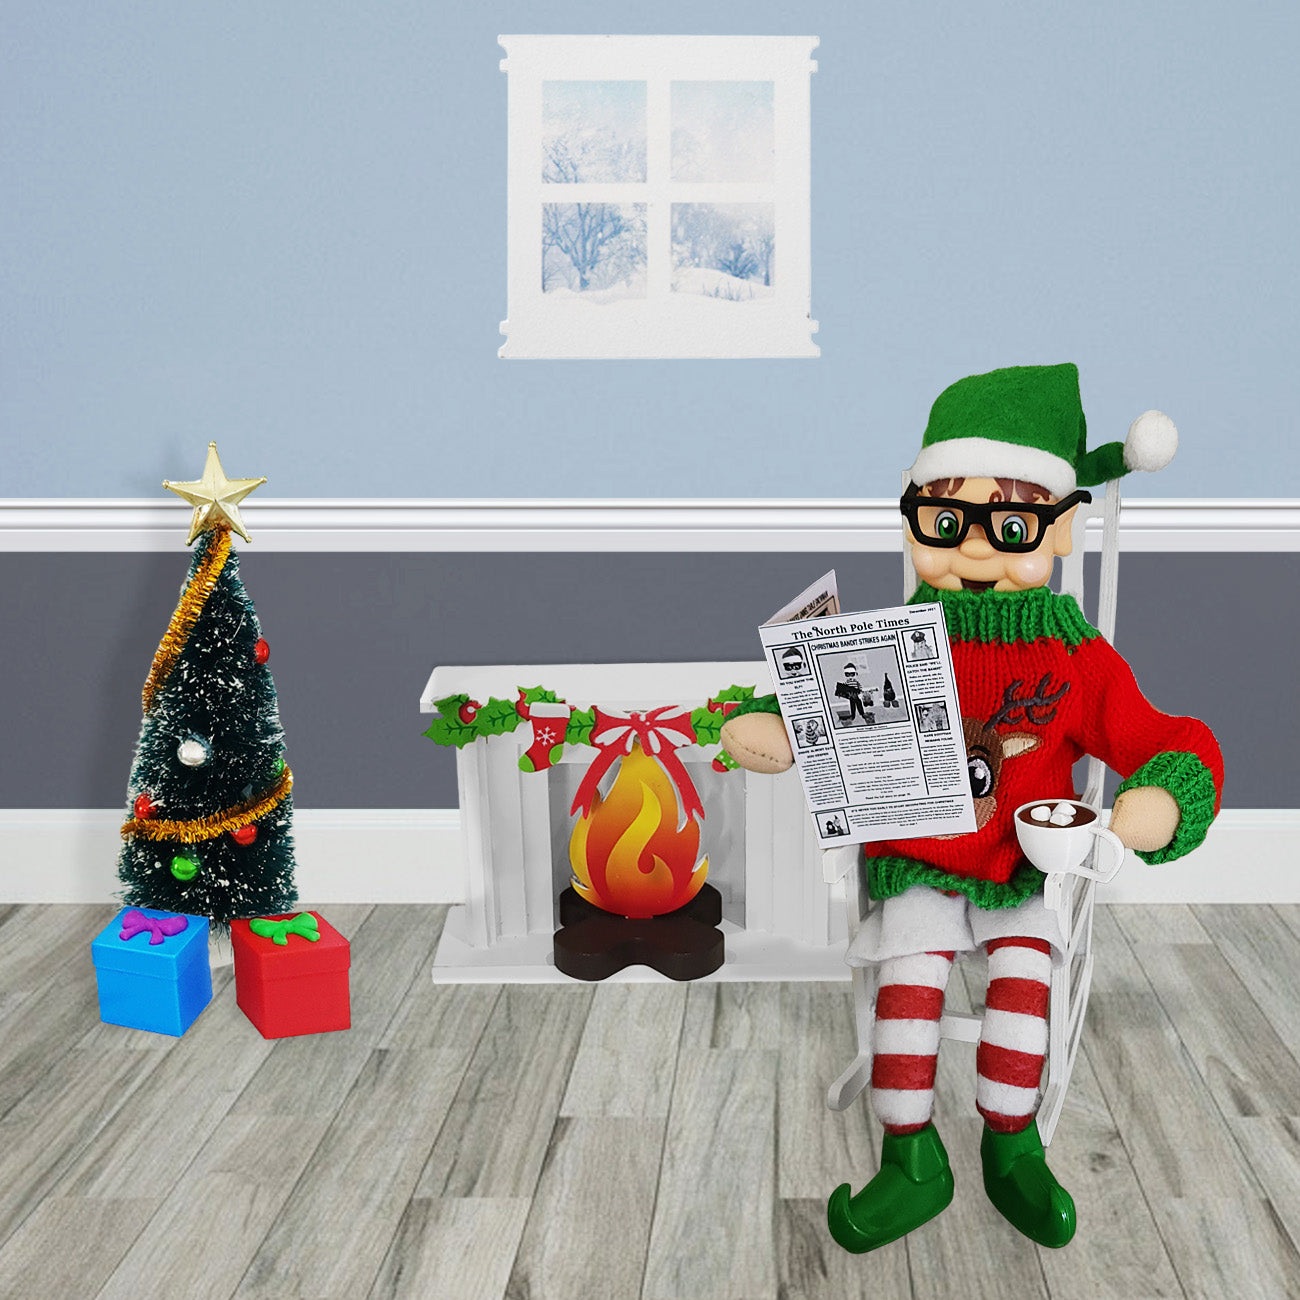 Boy elf wearing glasses, ugly sweater reading the newspaper in his elf house. A fireplace and tree is in his scene